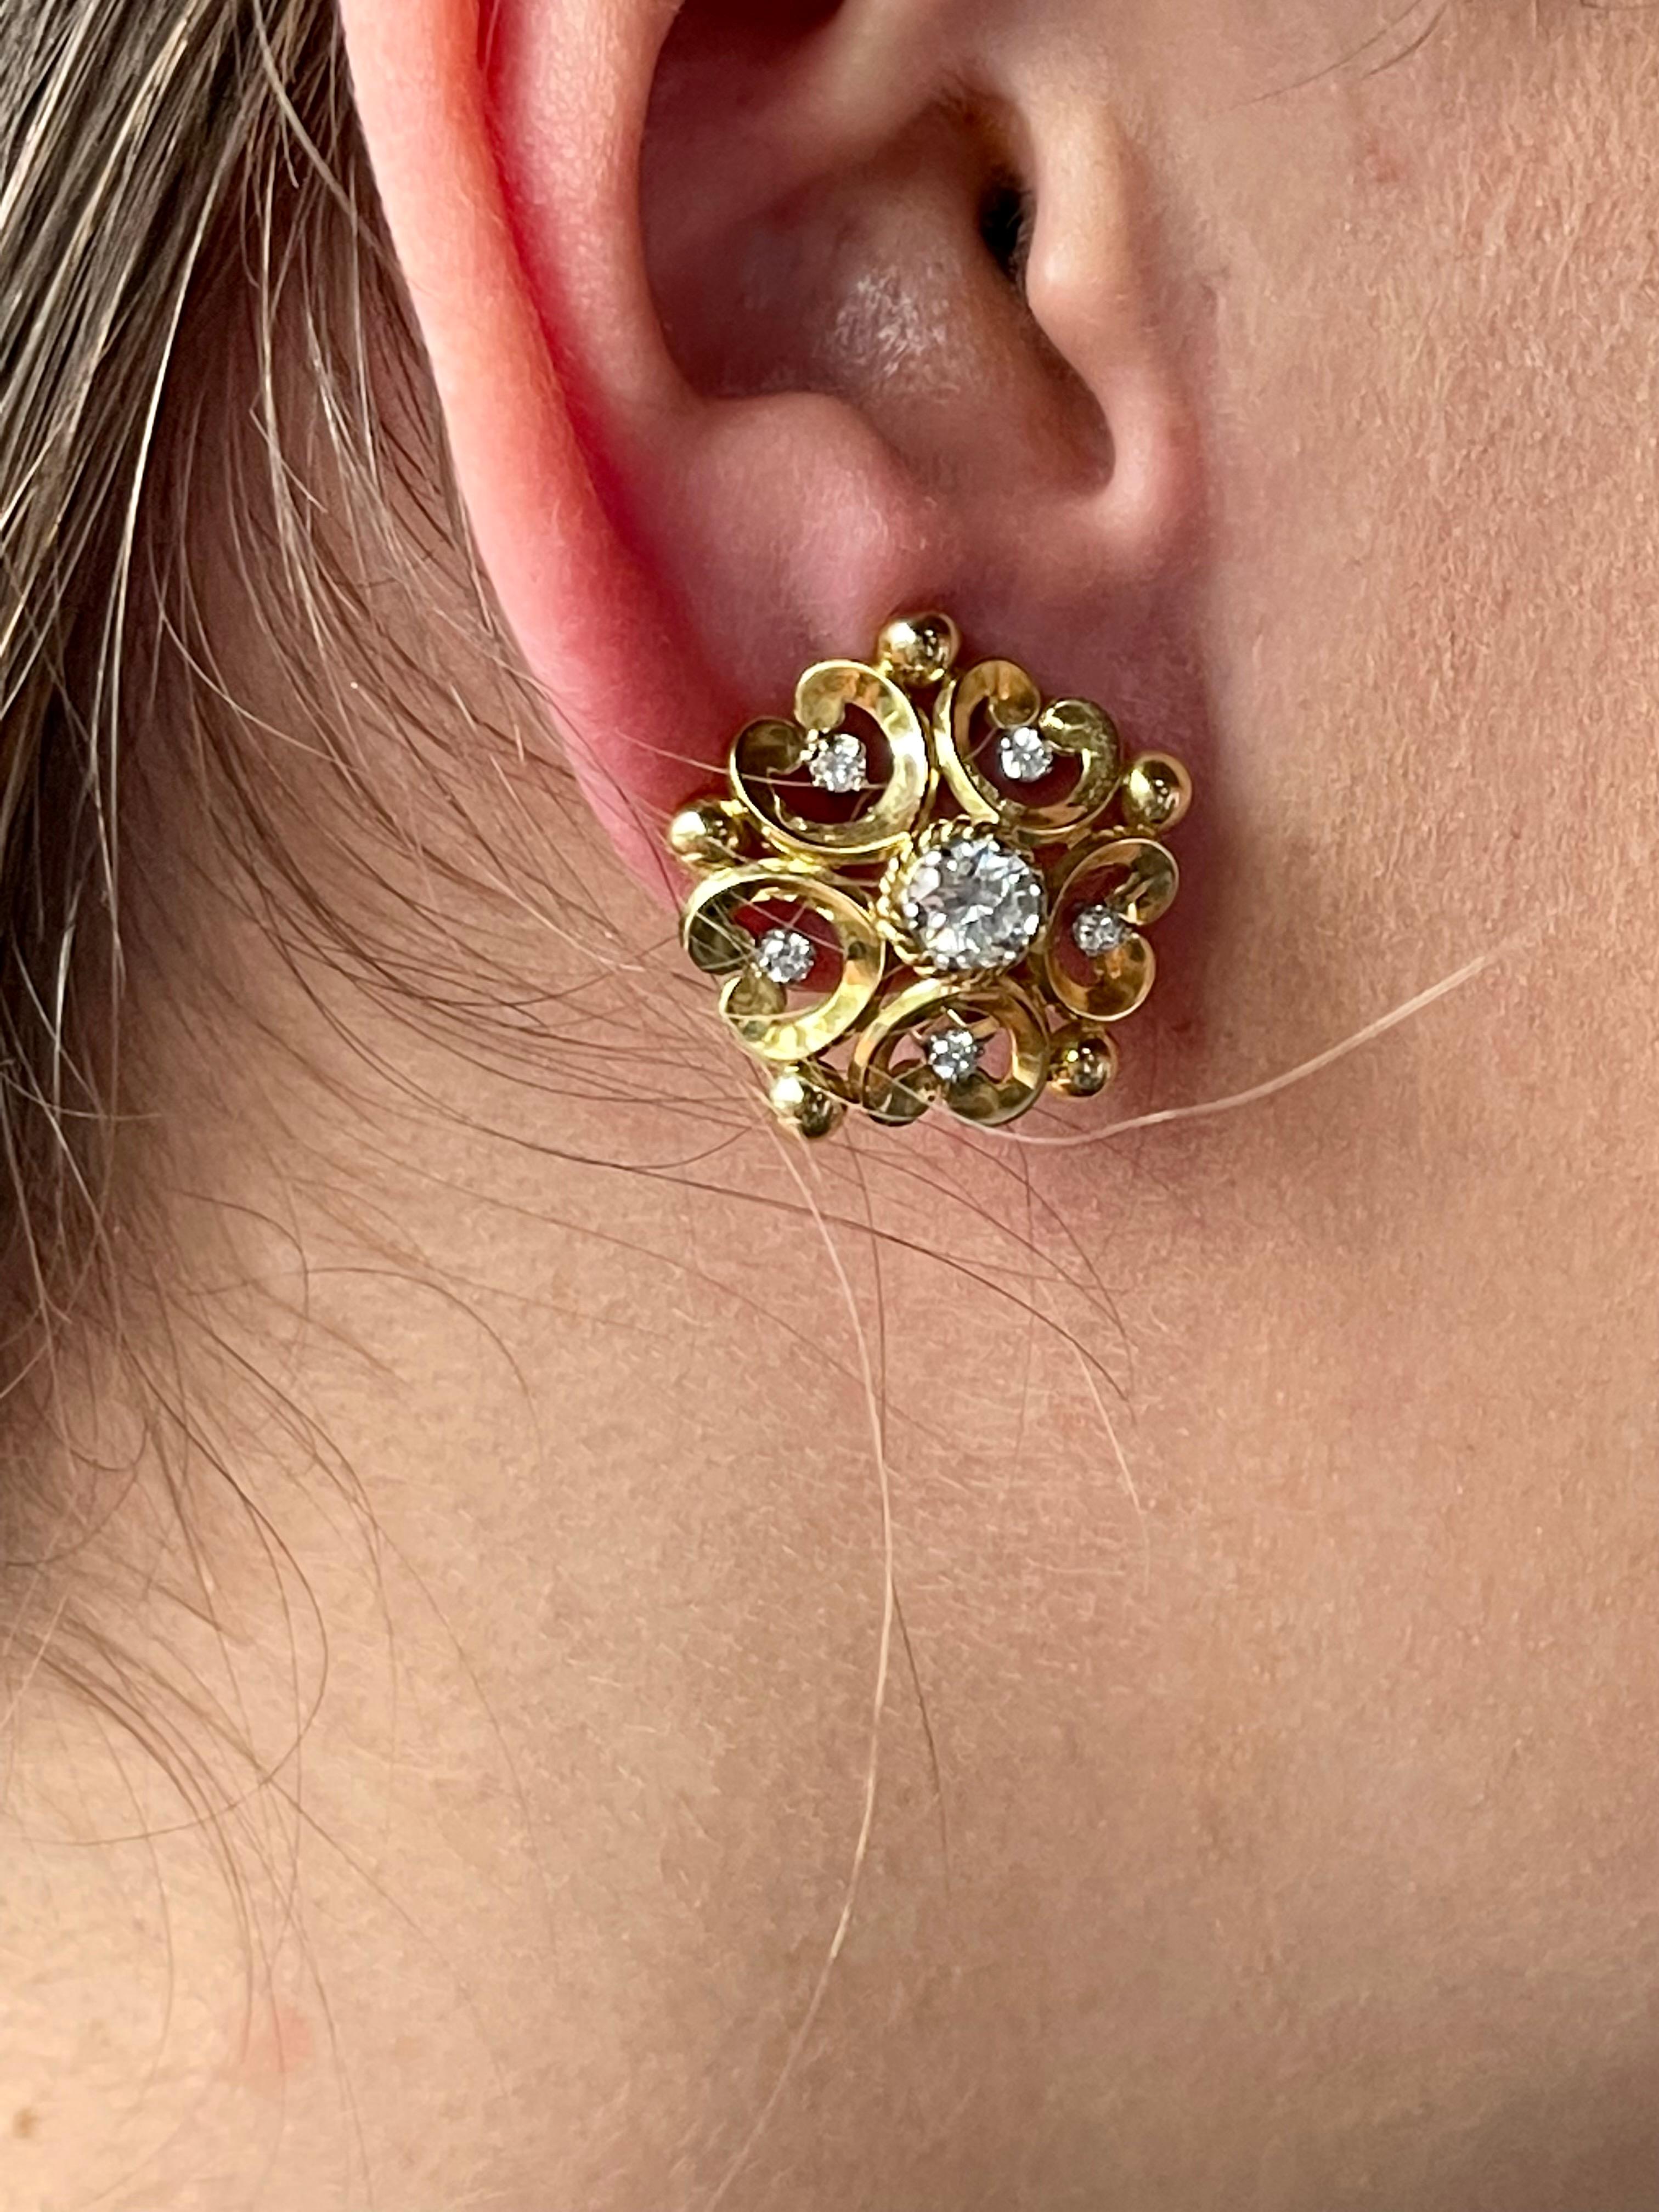 A pair of lovely vintage earclips of floral design. Set with 12 briliinat cut Diamonds with a total weight of approximately 1.06 ct. G color, vs 1 clarity. The 2 centre stones weigh approximately 0.86 ct. Signed by the renowned company Gübelin